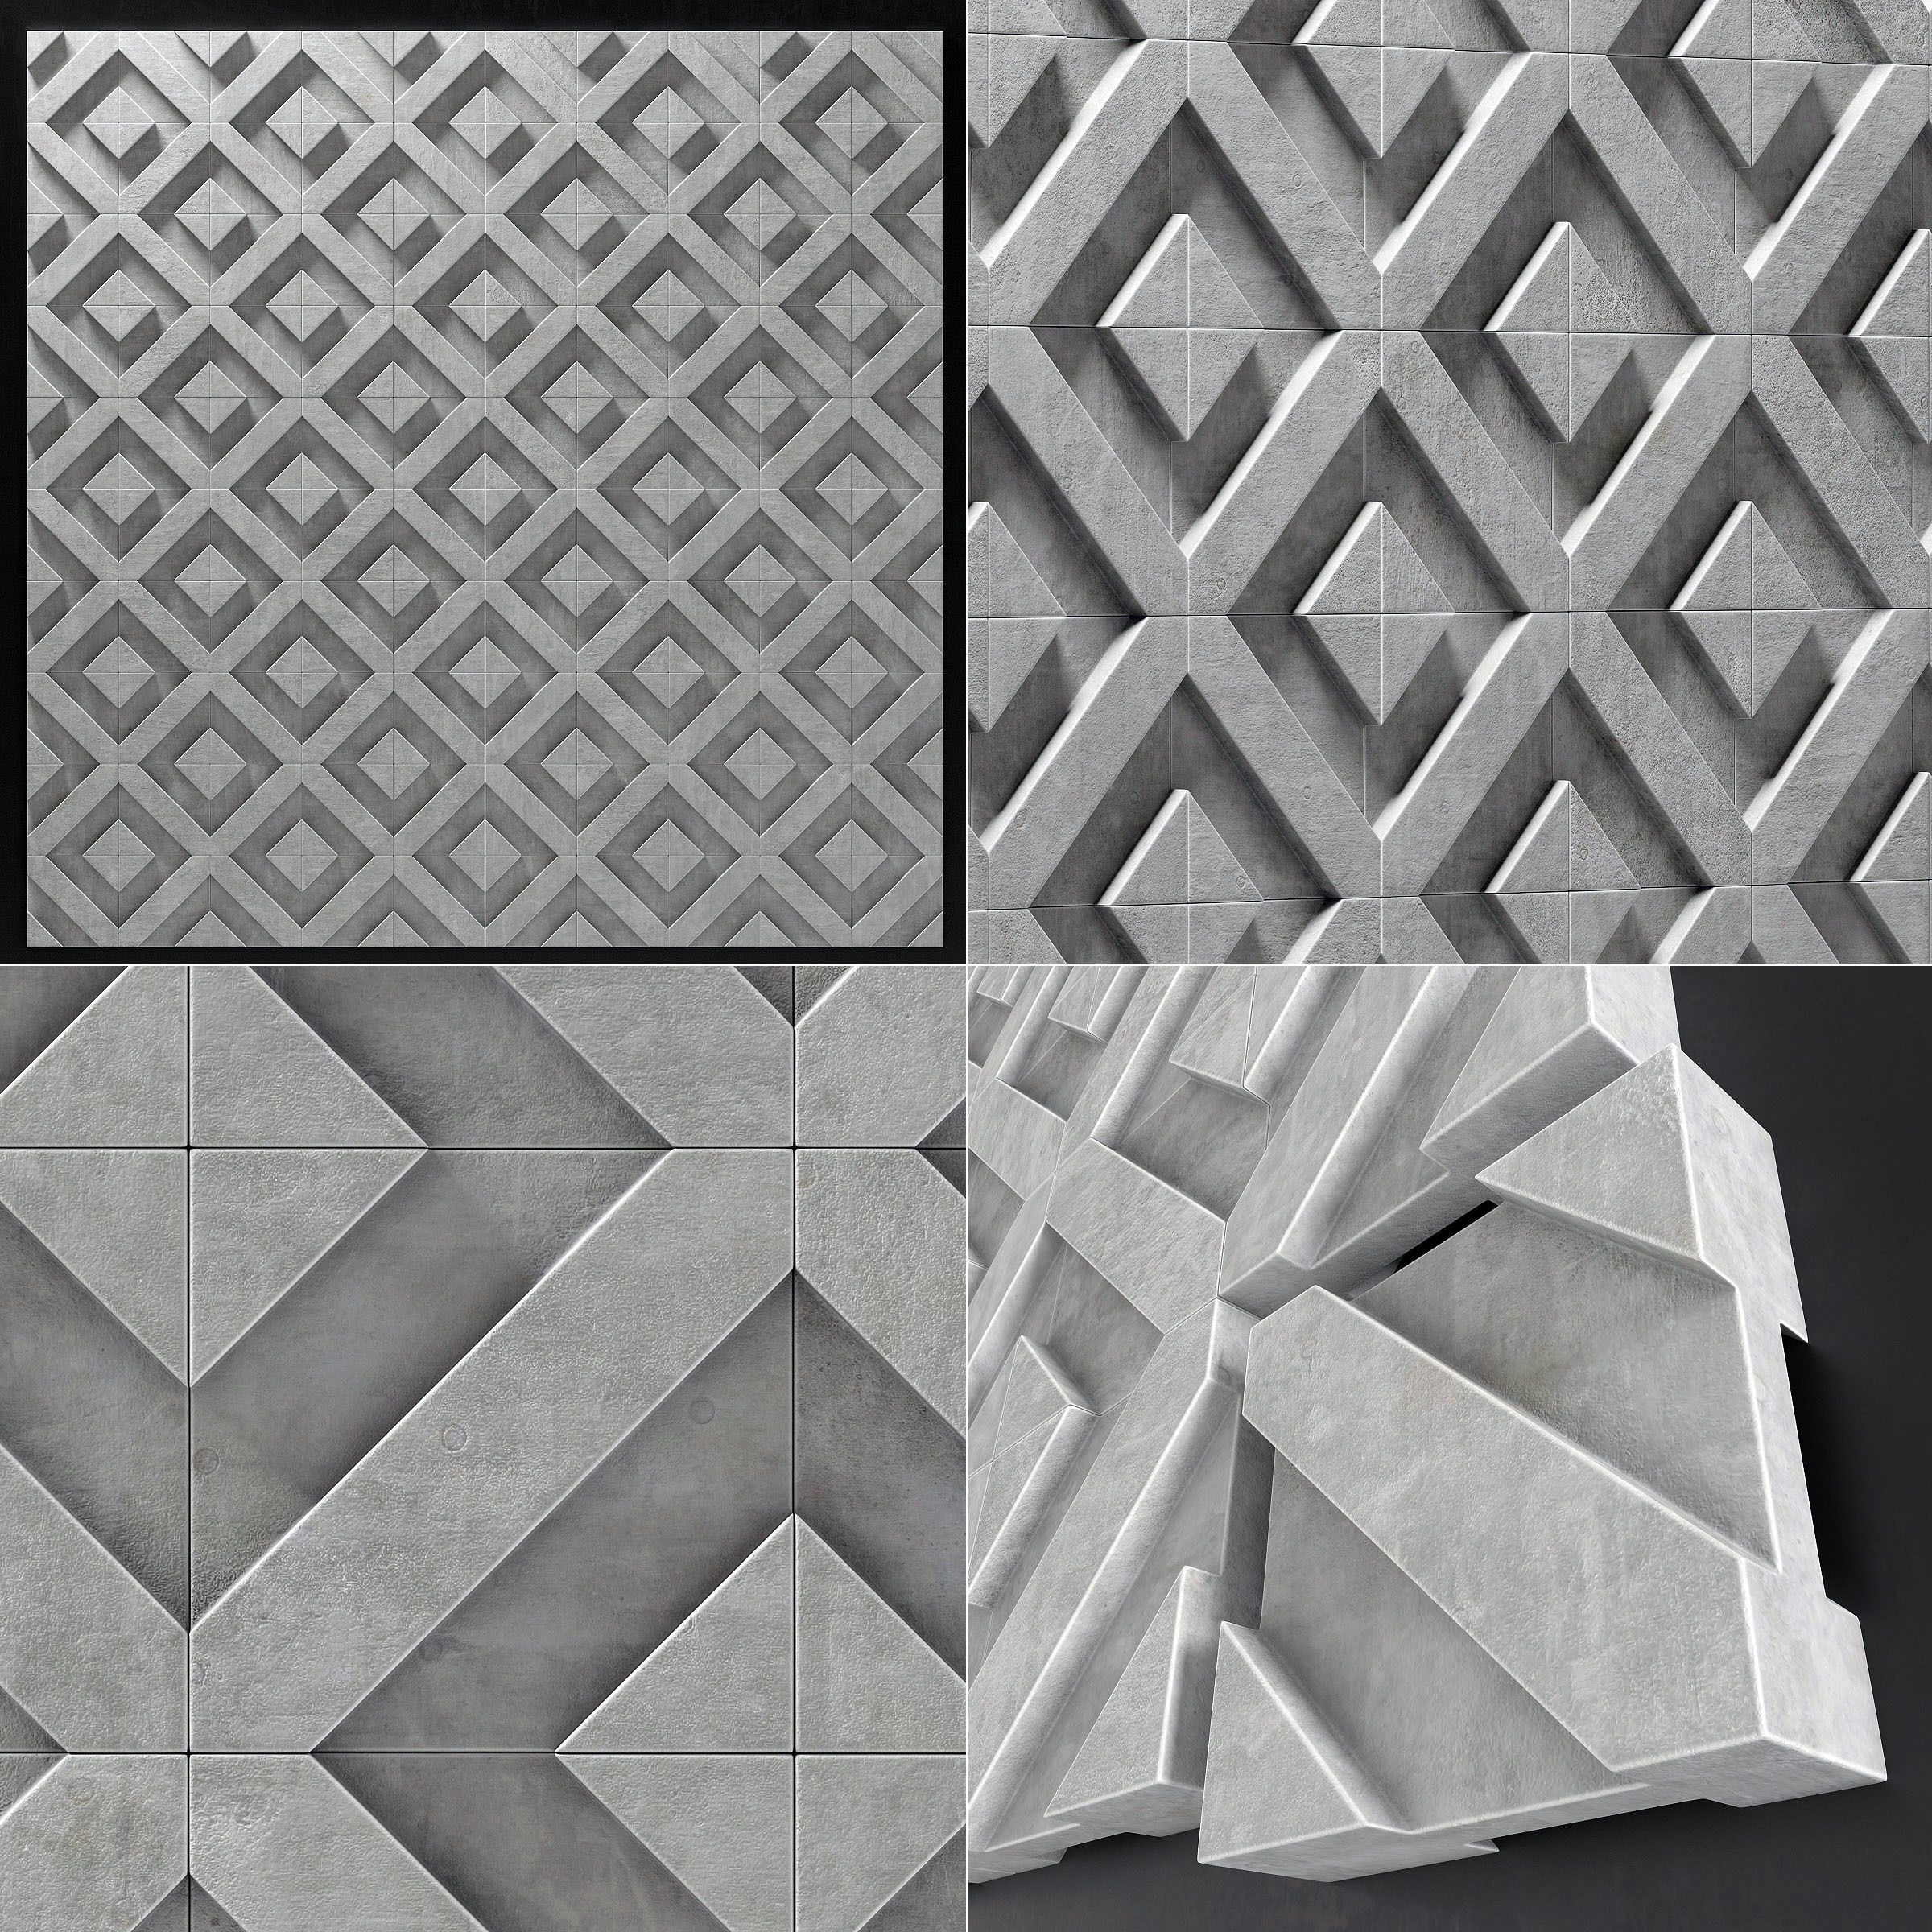 3d Wall Decor Concrete Tile Line Big N2 | Cgtrader In Concrete Wall Art (View 7 of 15)